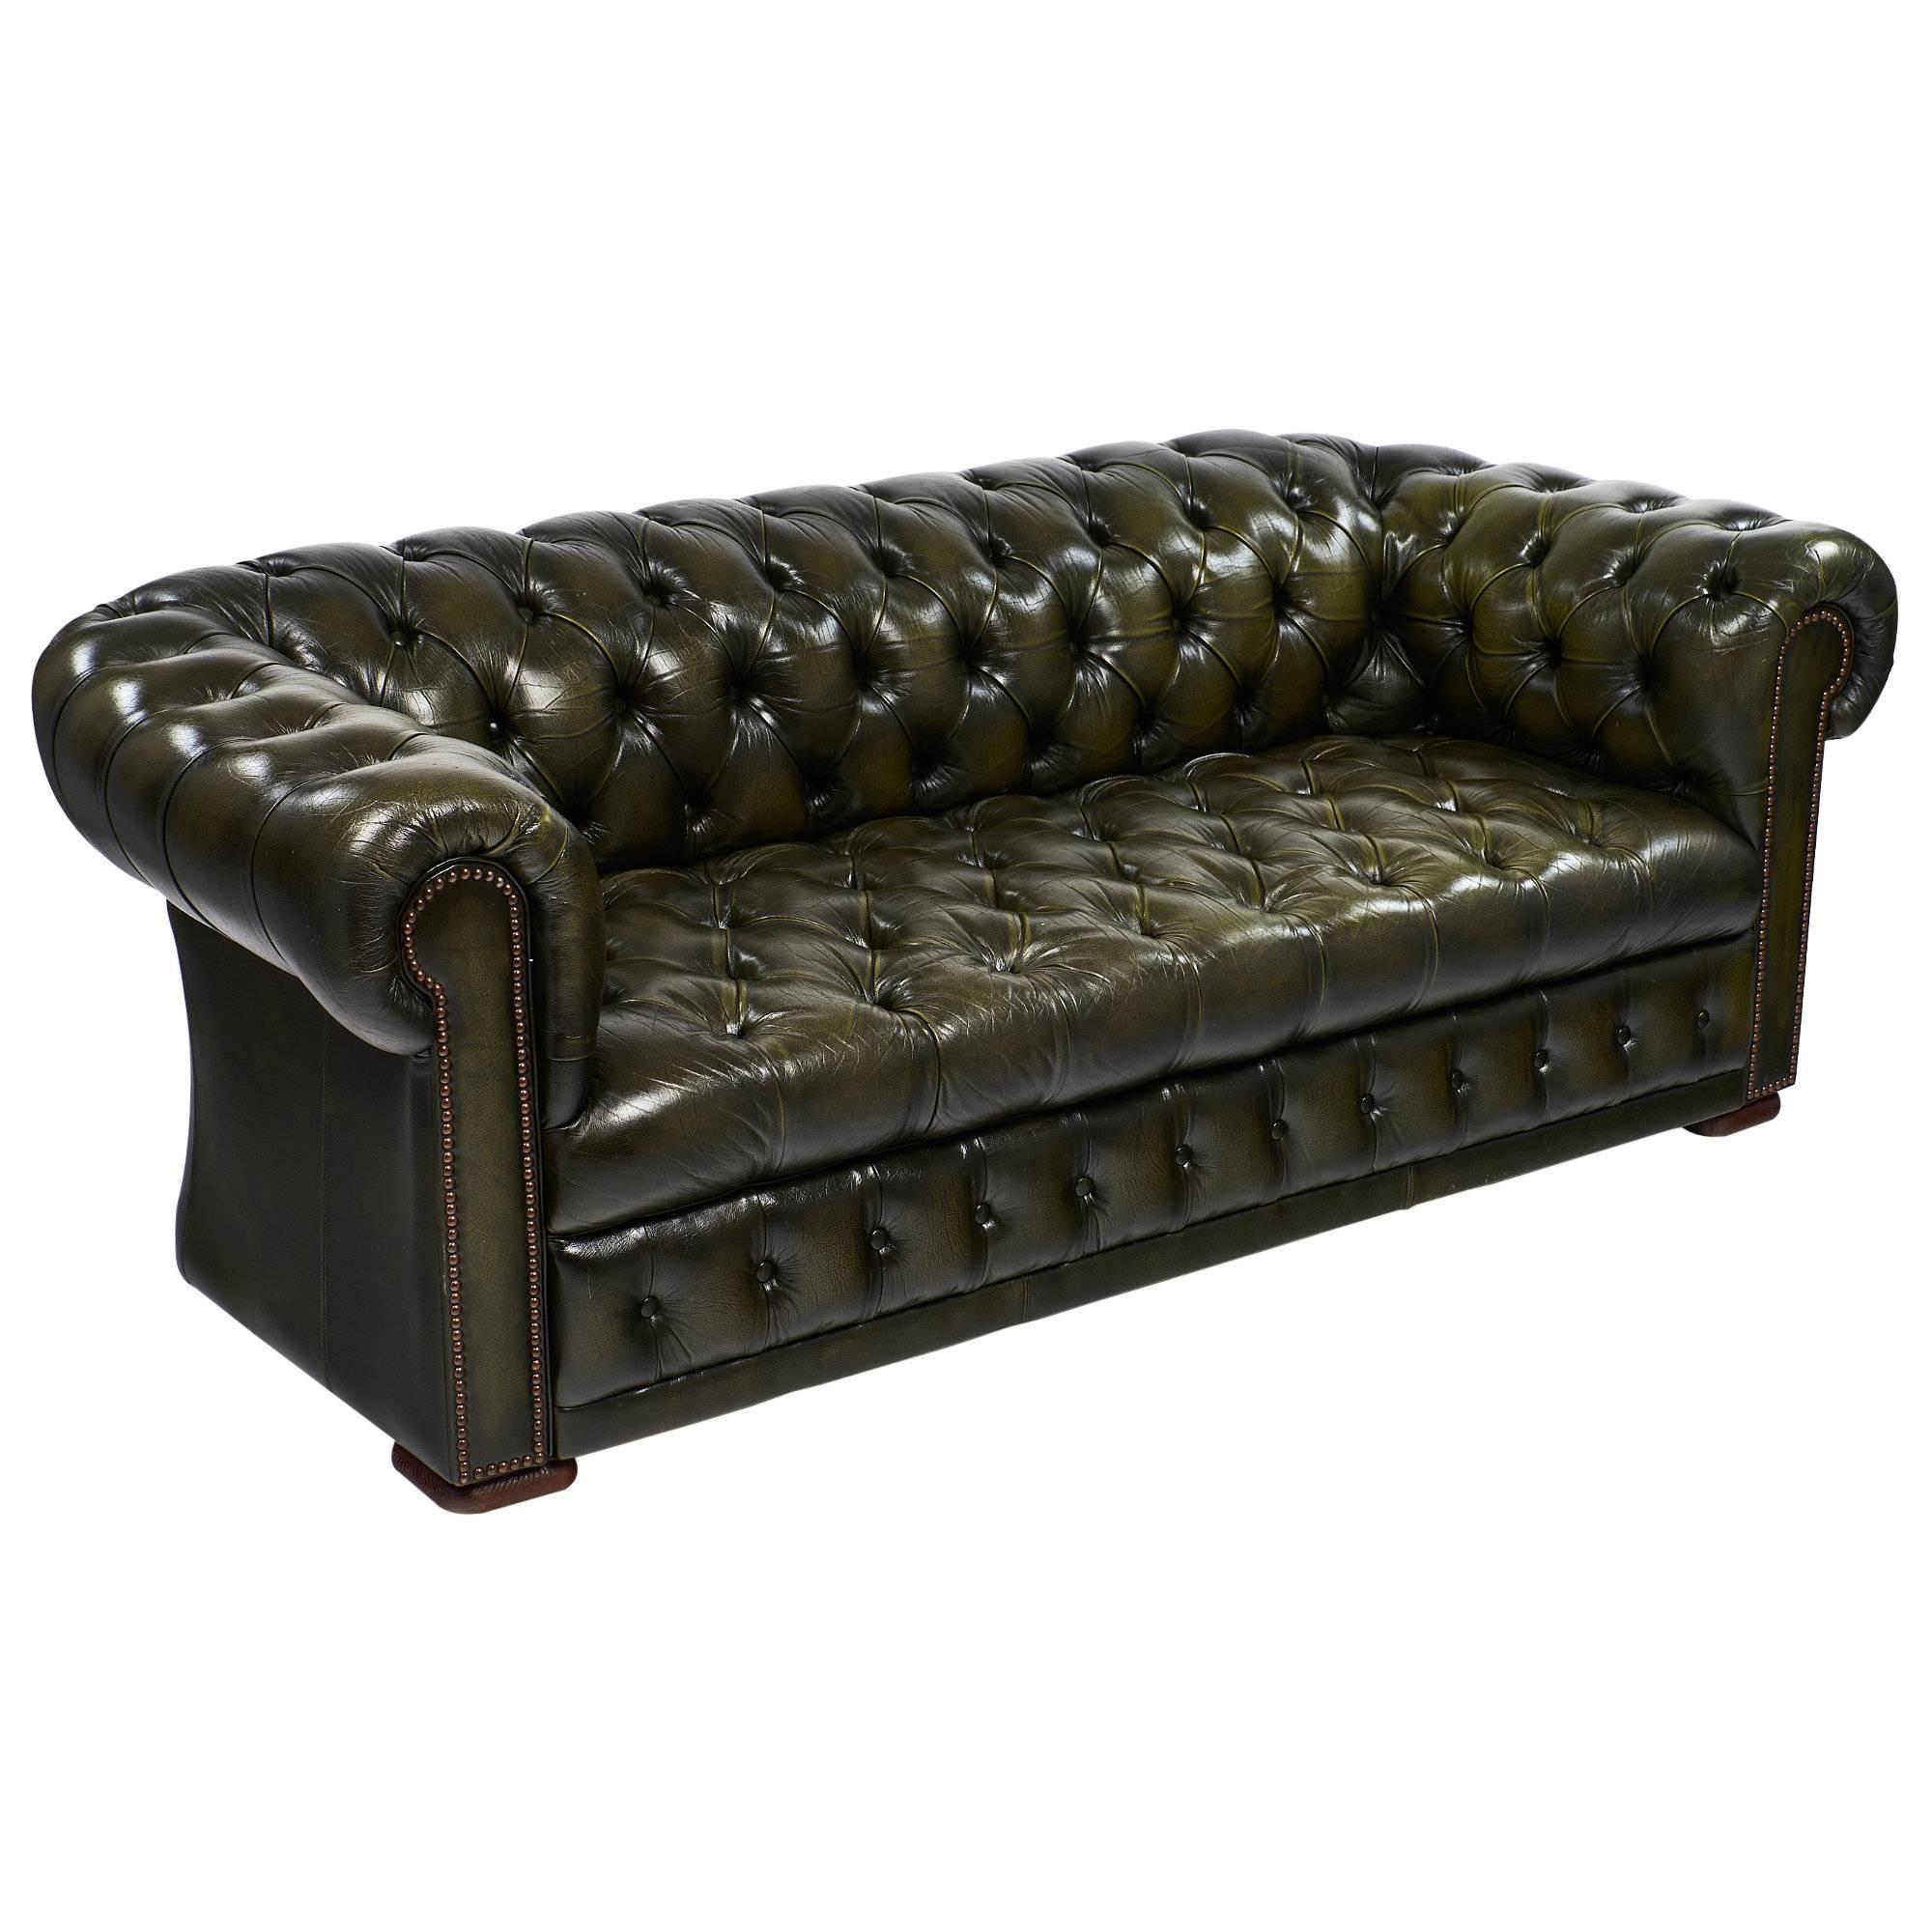 Green Leather Vintage Chesterfield Sofa